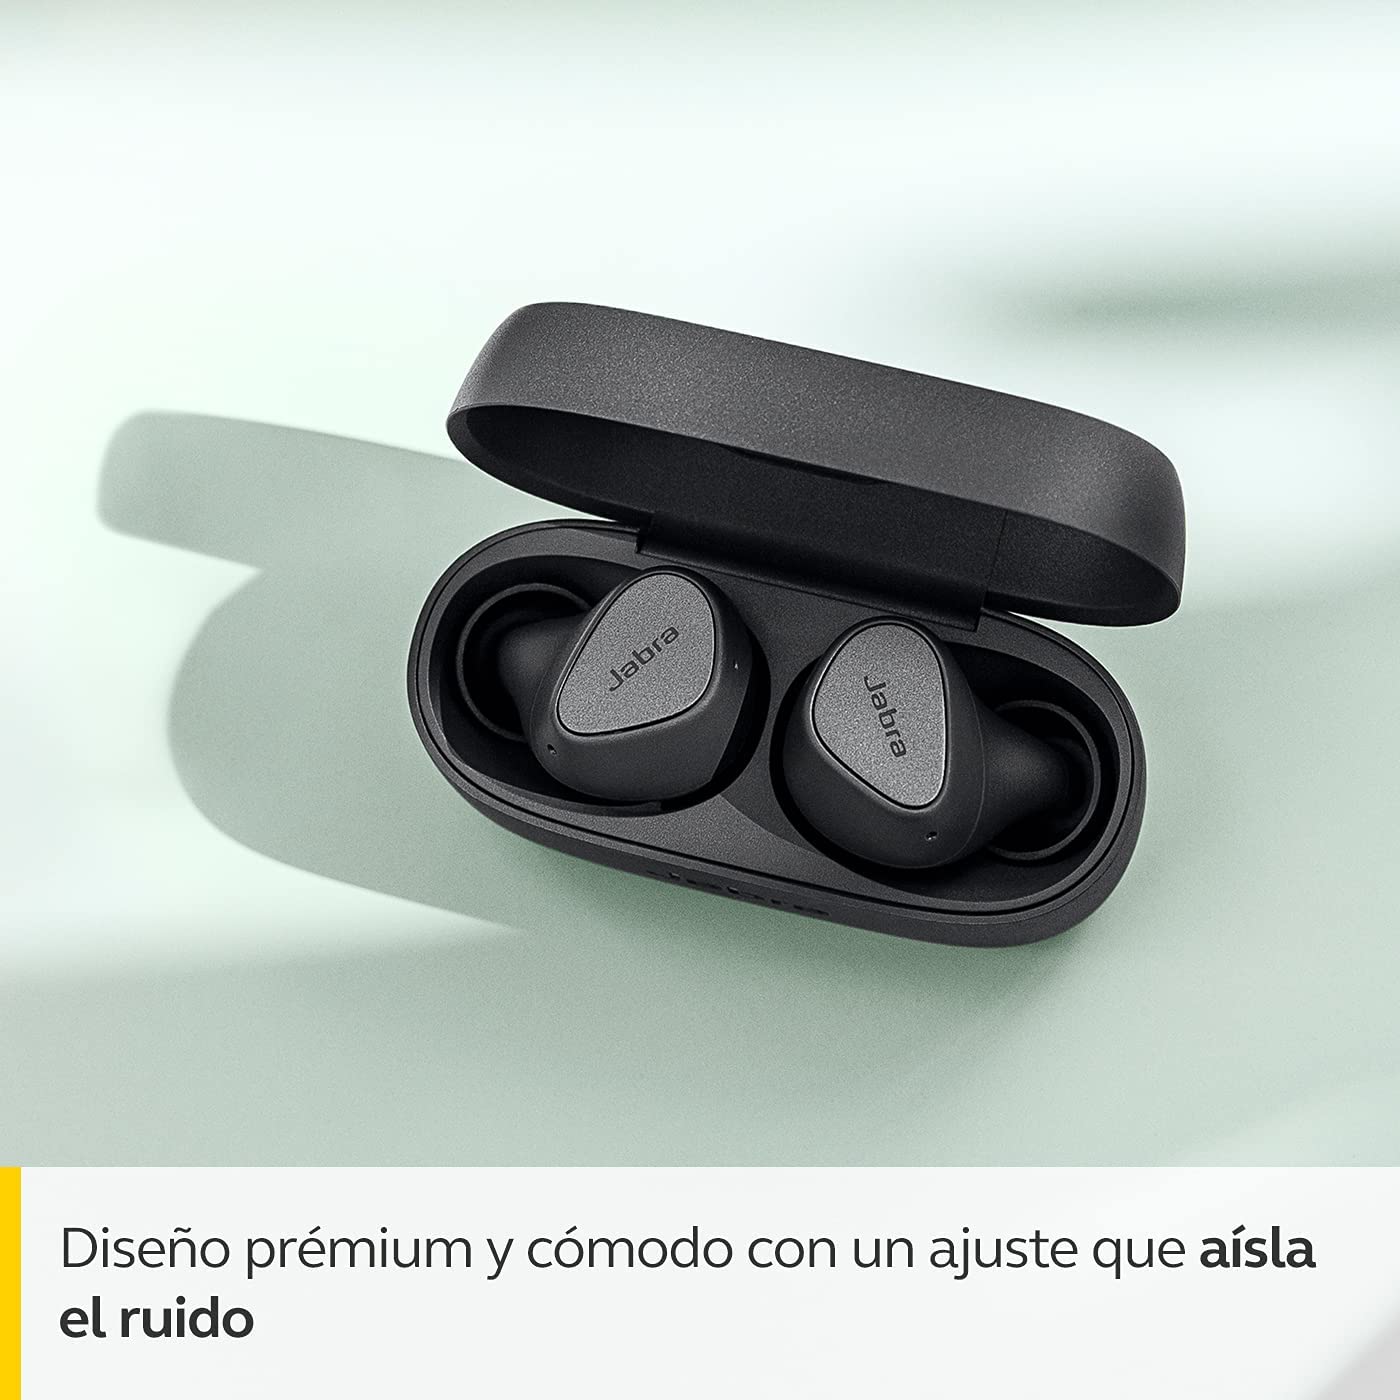 Jabra Elite 3 In Ear Wireless Bluetooth Earbuds – Noise isolating True Wireless buds with 4 built-in Microphones for Clear Calls, Rich Bass, Customizable Sound, and Mono Mode - Dark Grey